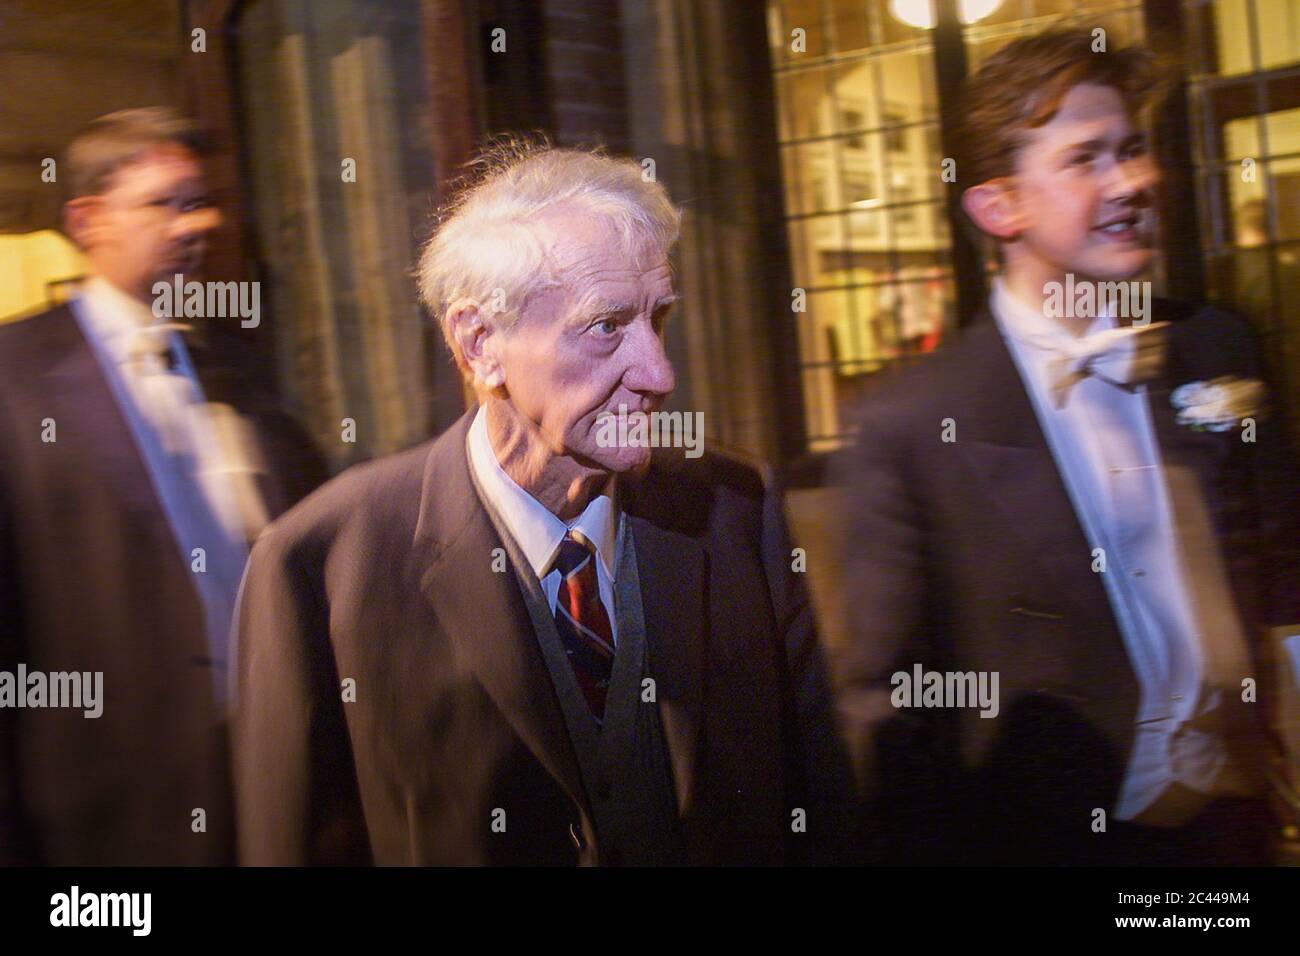 Historical archive image  Former Prime Minister of Rhodesia, Ian Smith, photographed at Oxford Union Society in 2000 Stock Photo